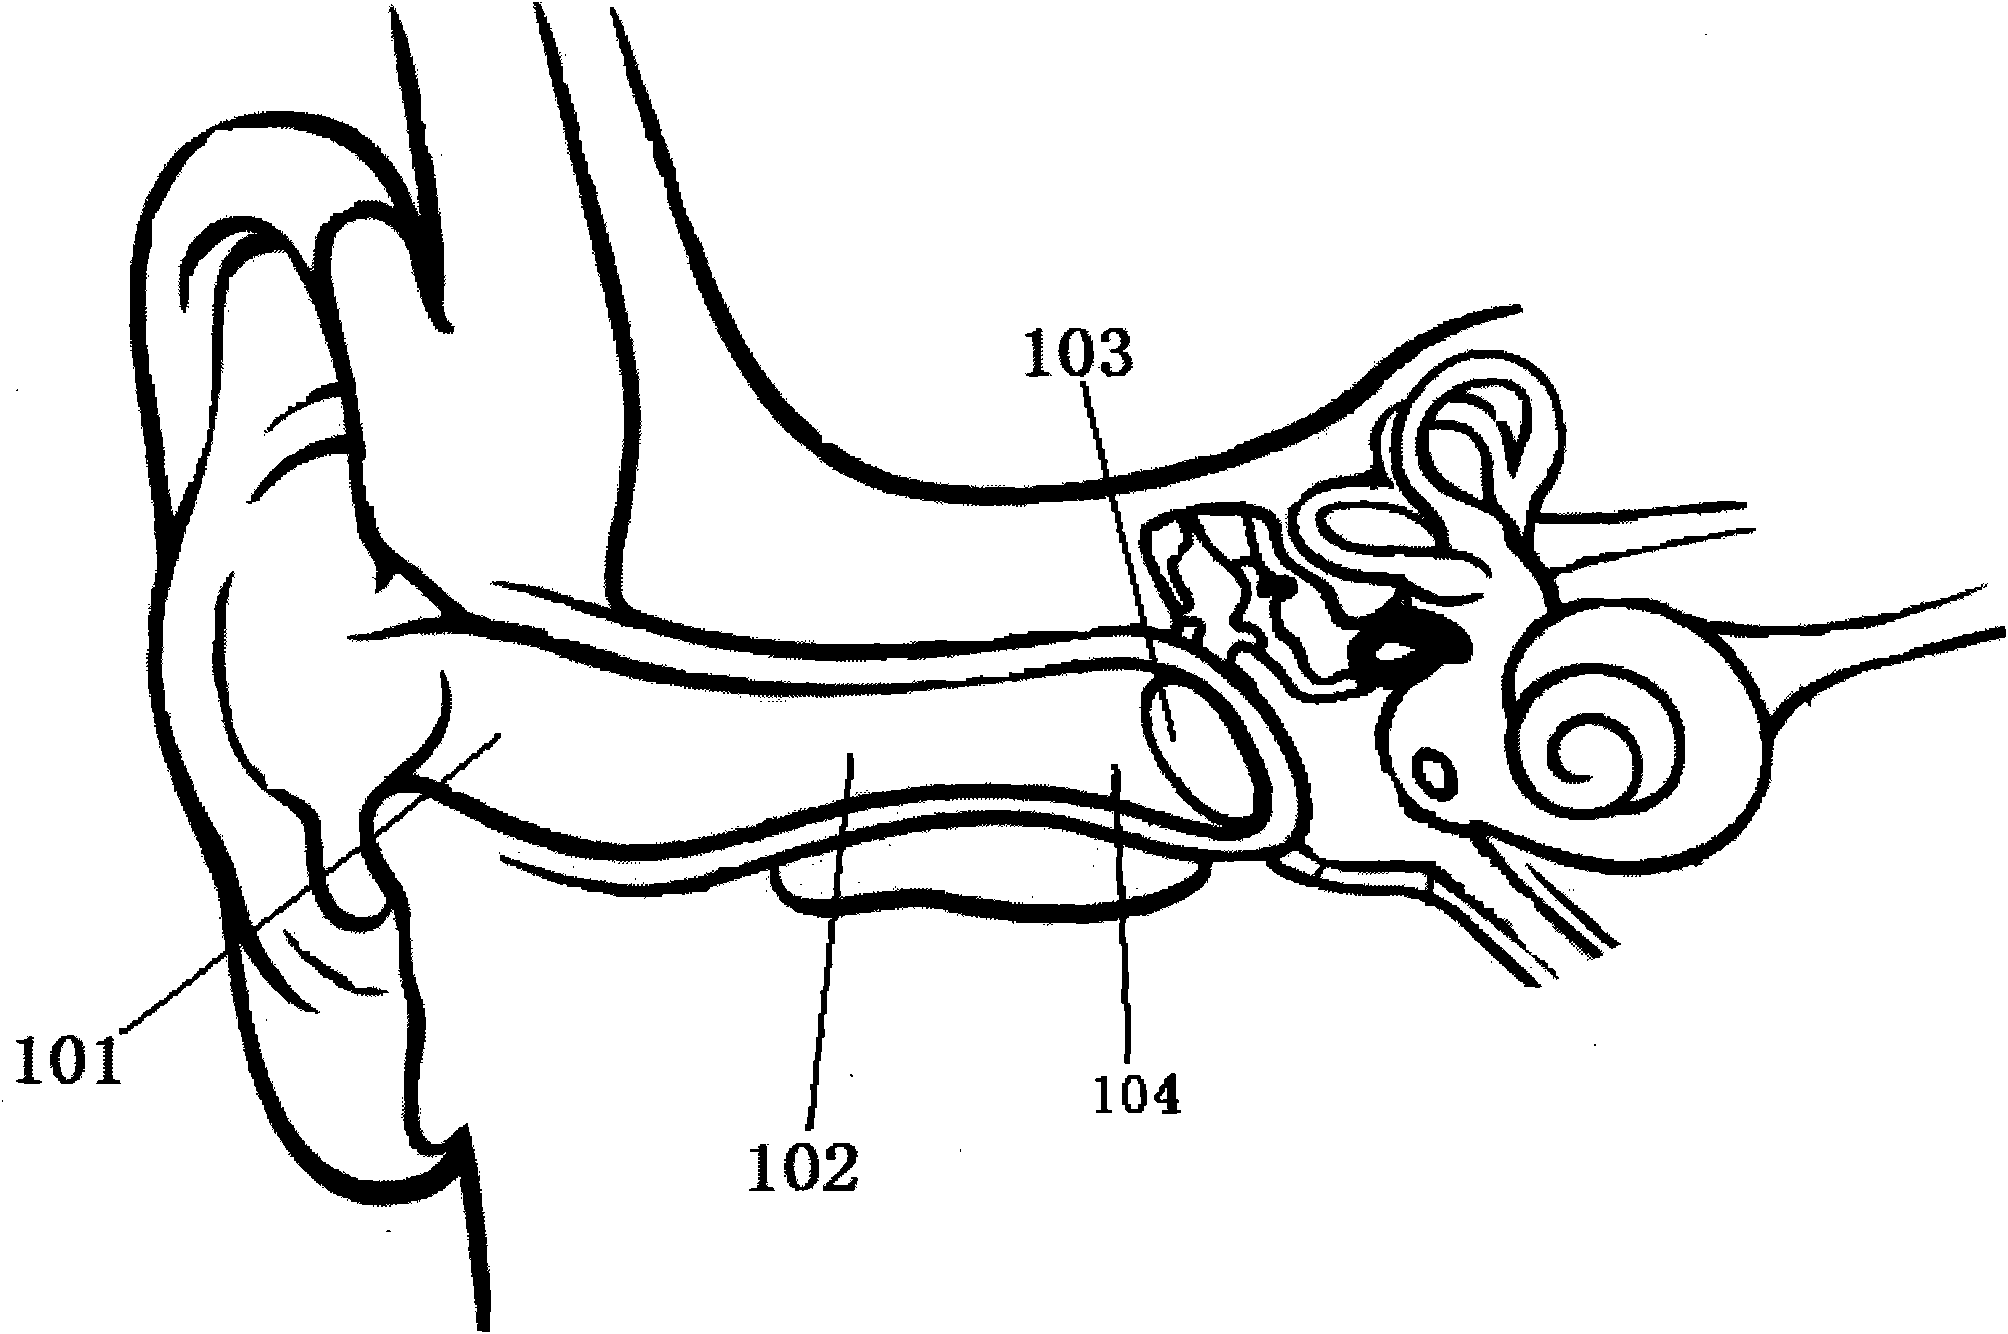 Ear-carried type hearing aid for receiving sound in ears